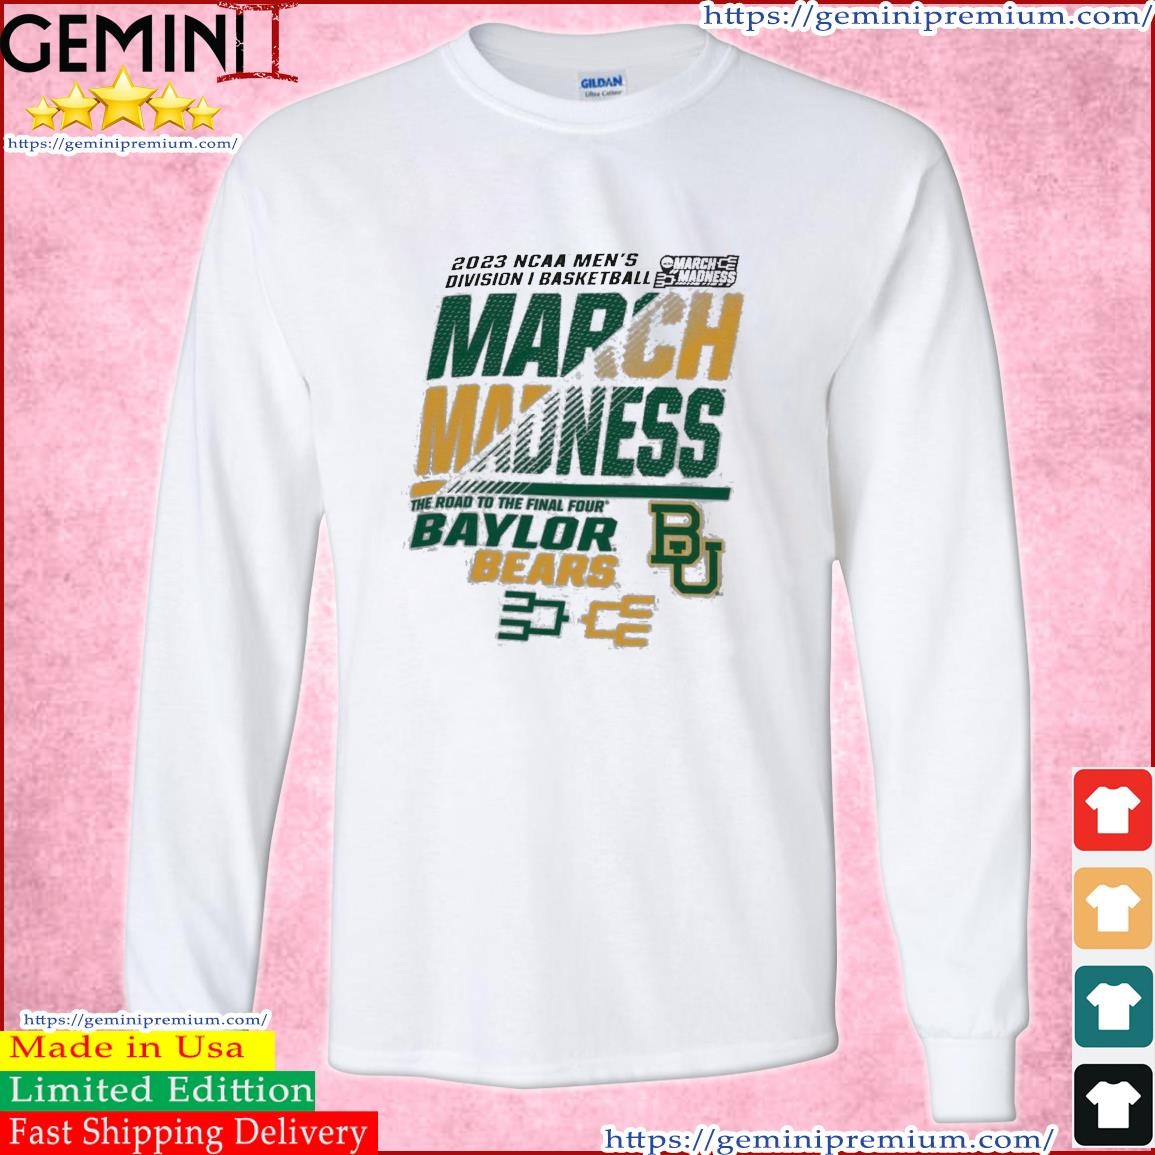 Baylor Bears Men's Basketball 2023 NCAA March Madness The Road To Final Four Shirt Long Sleeve Tee.jpg